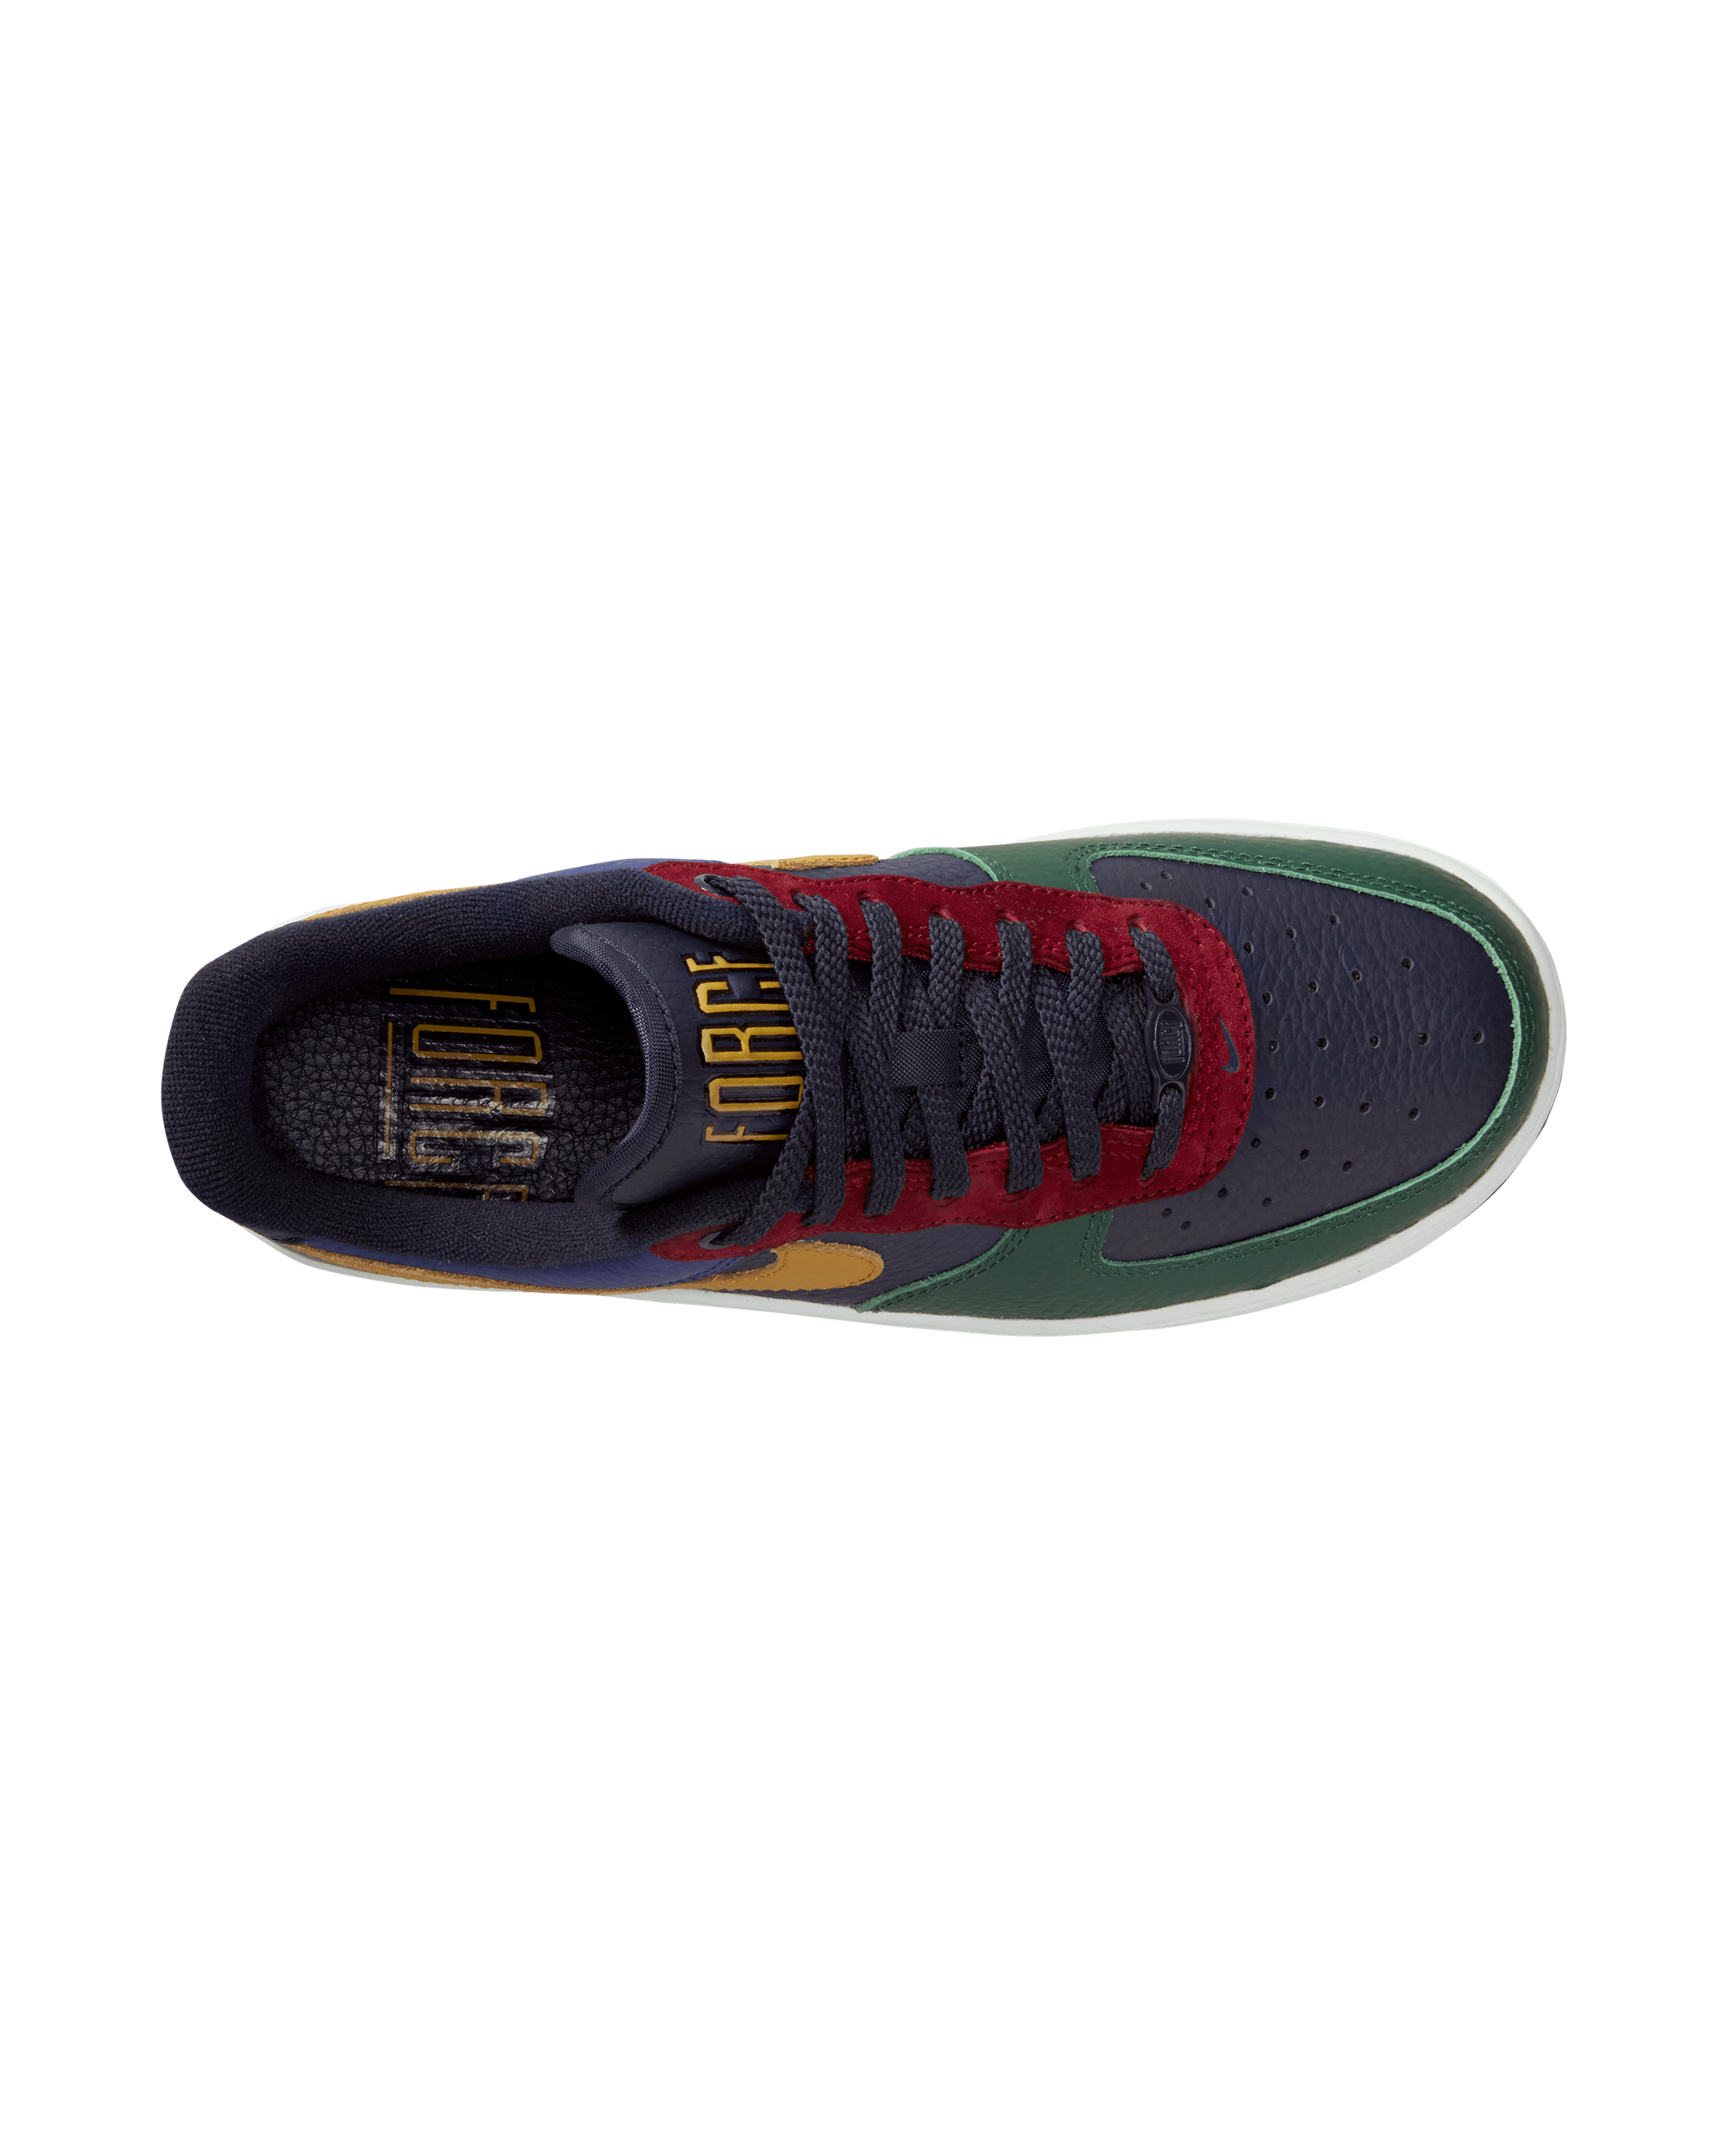 Womens Air Force 1 '07 LX - Gorge Green / Gold Suede / Obsidian